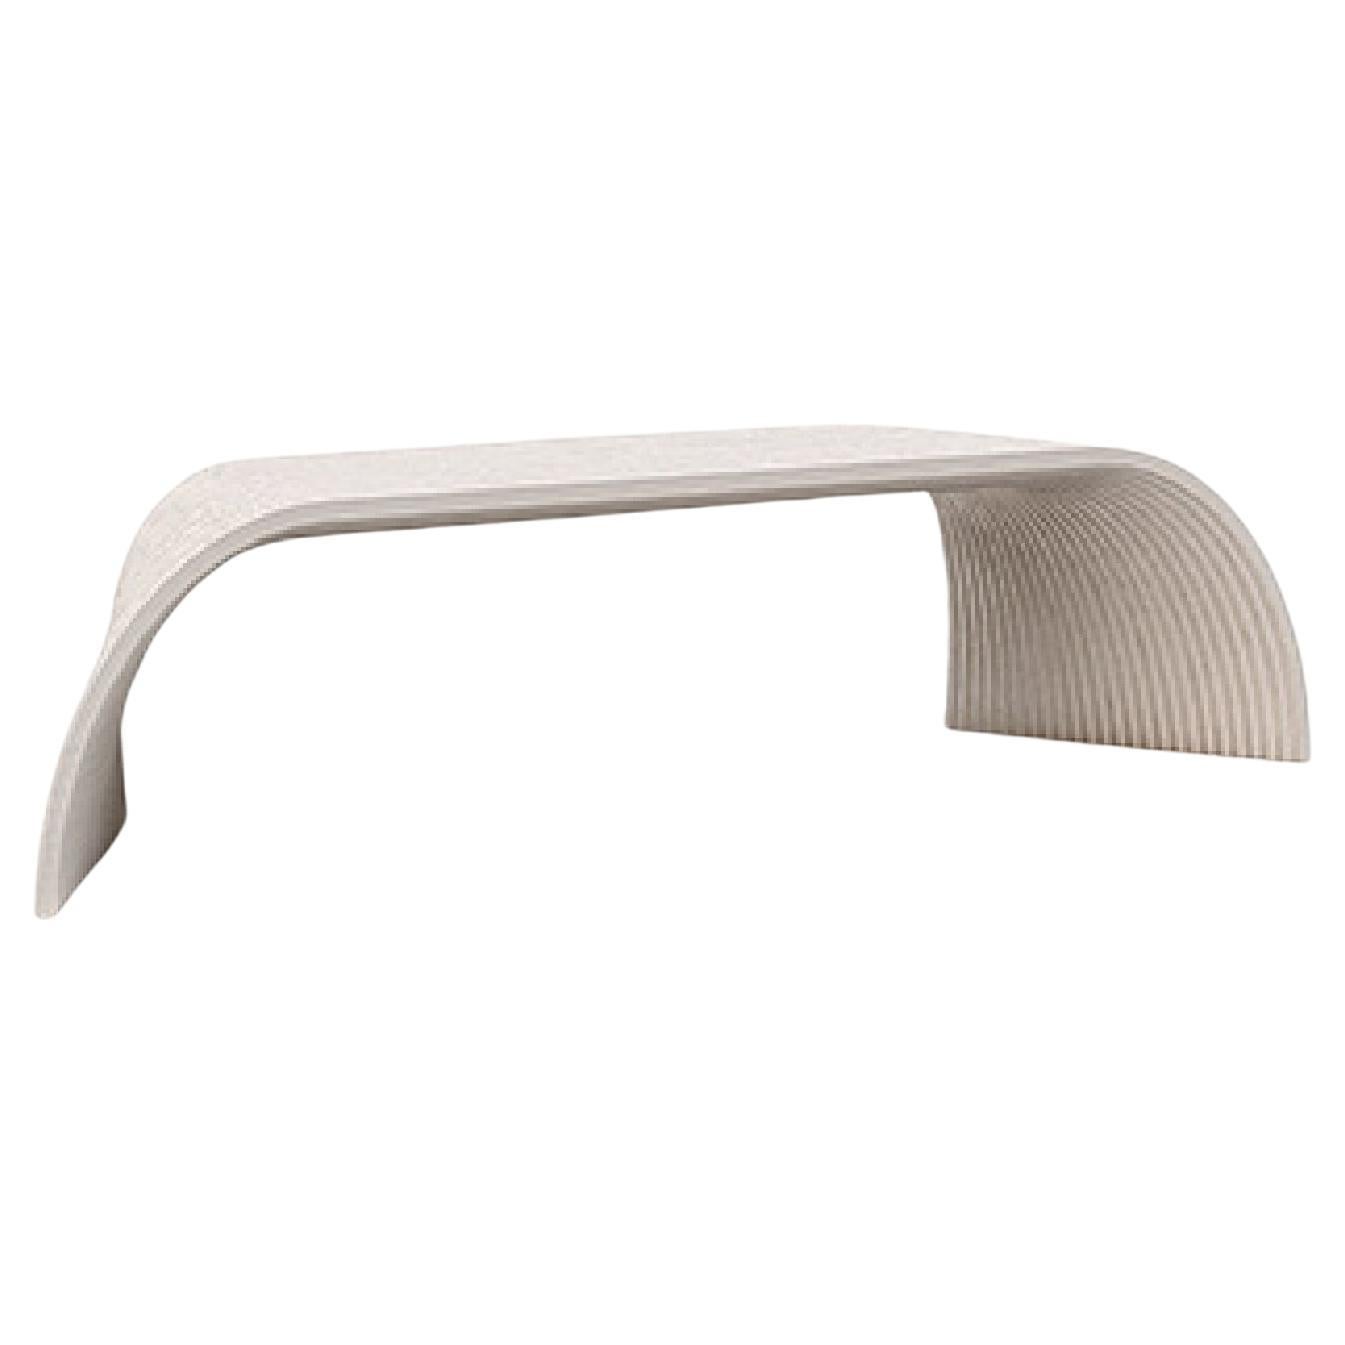 Arches Small by Piegatto, A Sculptural Bench For Sale